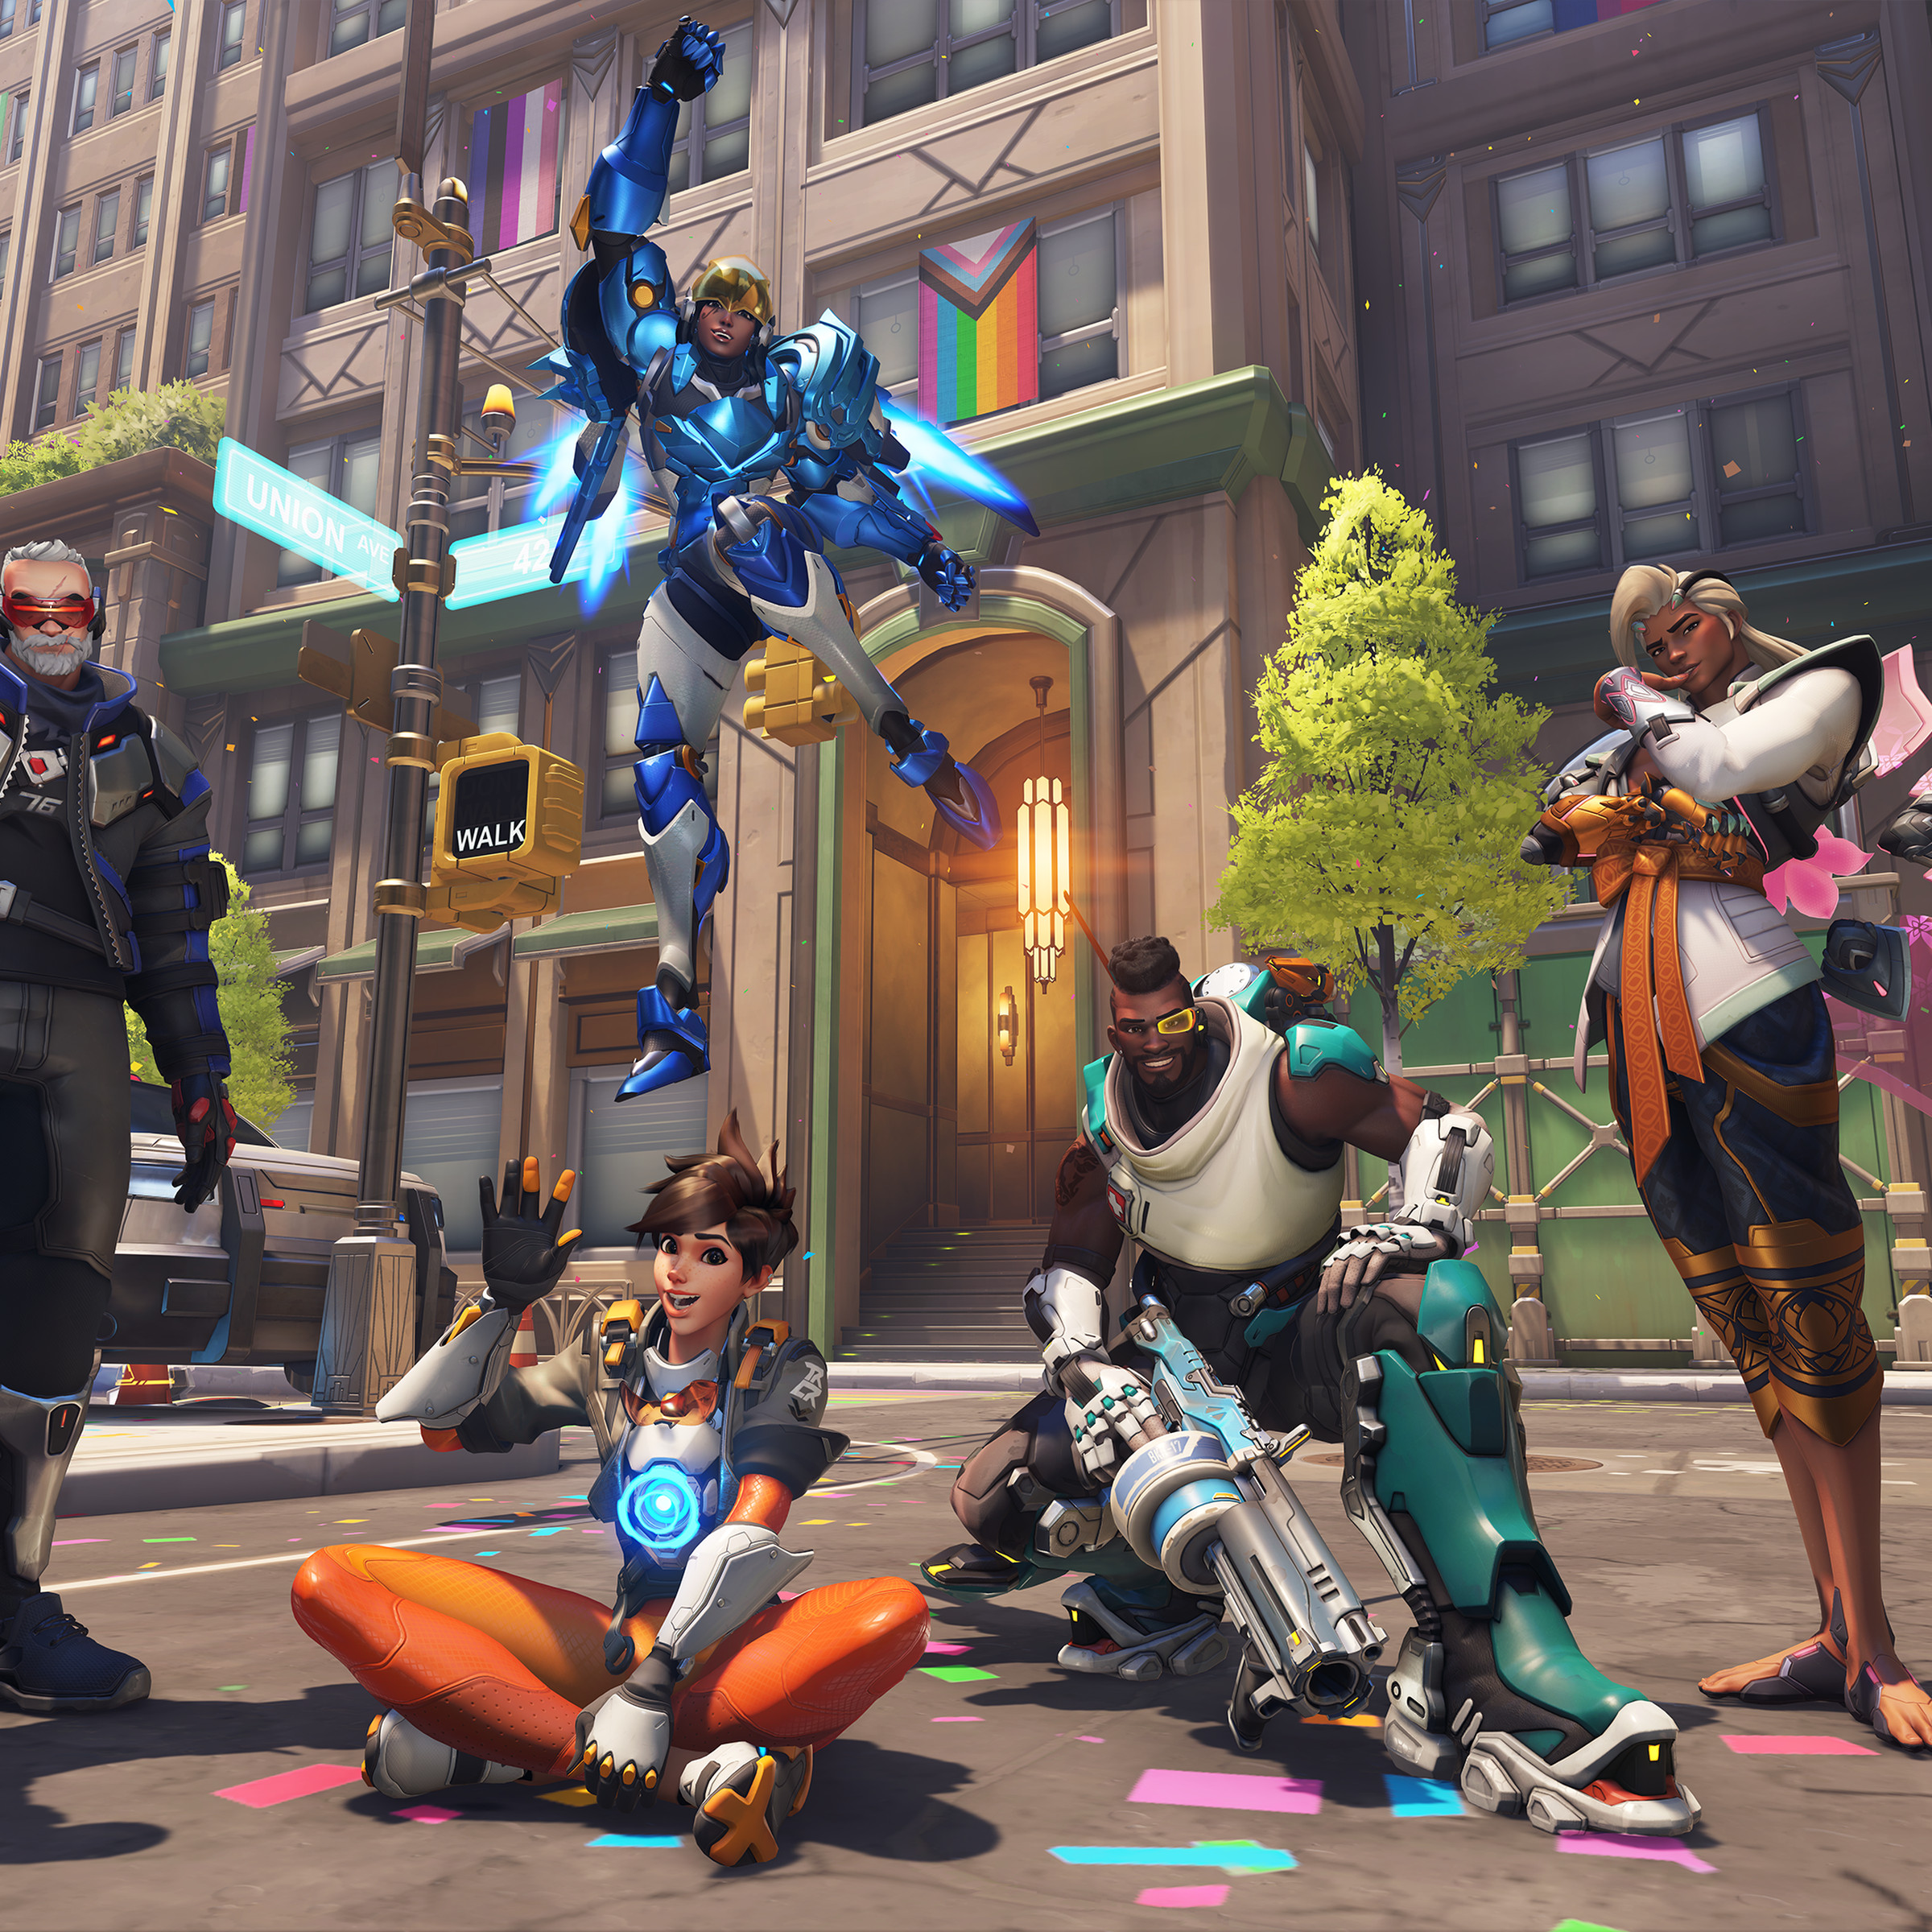 Screenshot from Overwatch 2 featuring the game’s queer heroes: Soldier: 76, Tracer, Baptiste, Lifeweaver, and Pharah, standing in the middle of the Midtown map decorated for a Pride parade